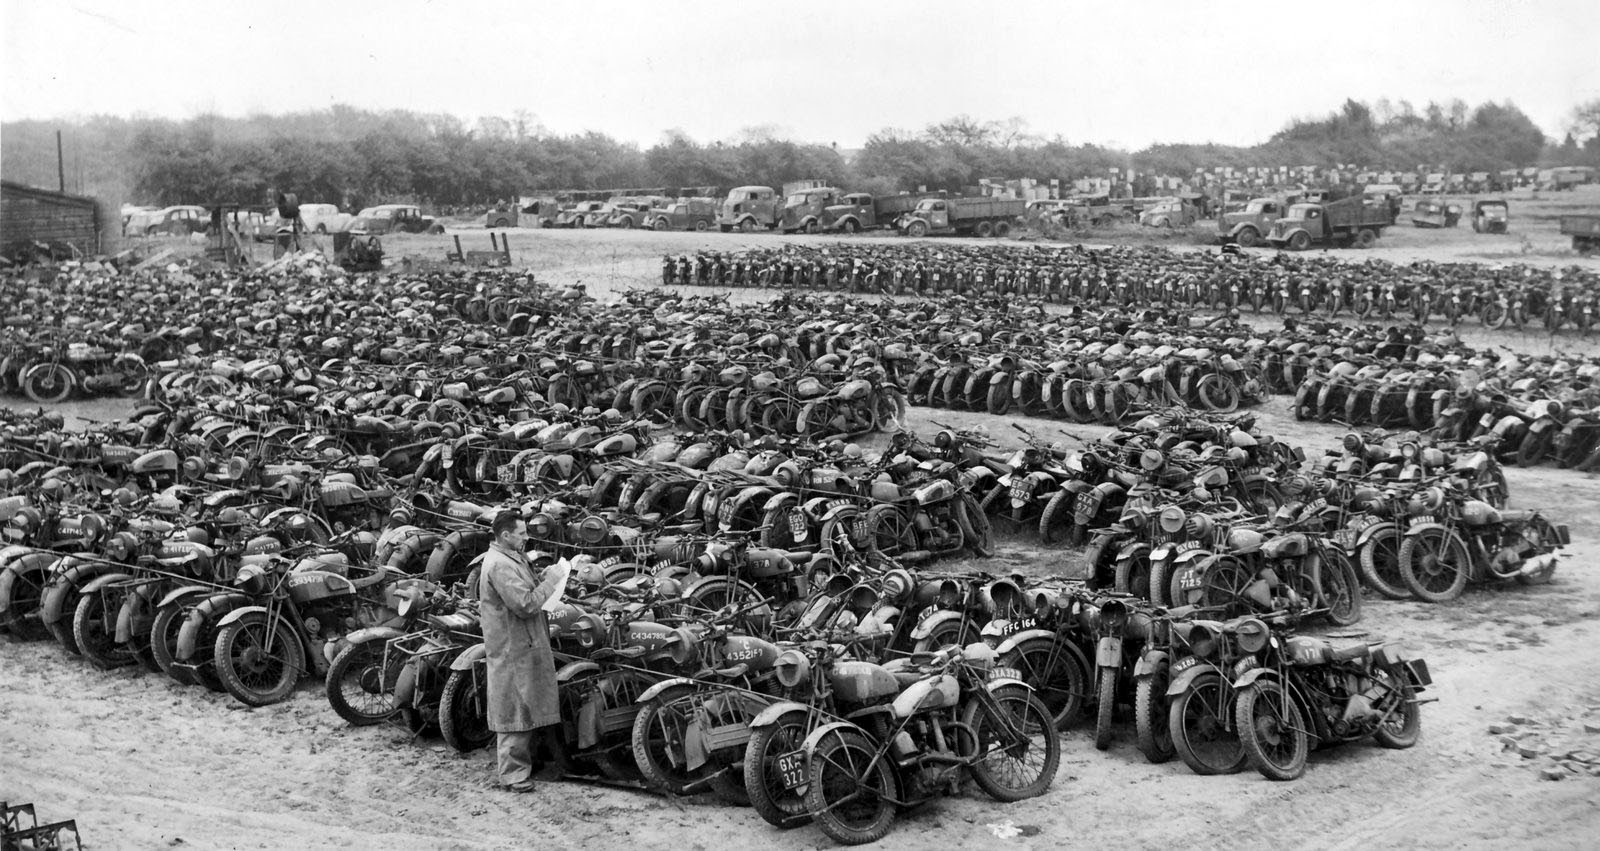 Vintage Military Motorcycles For Sale 119